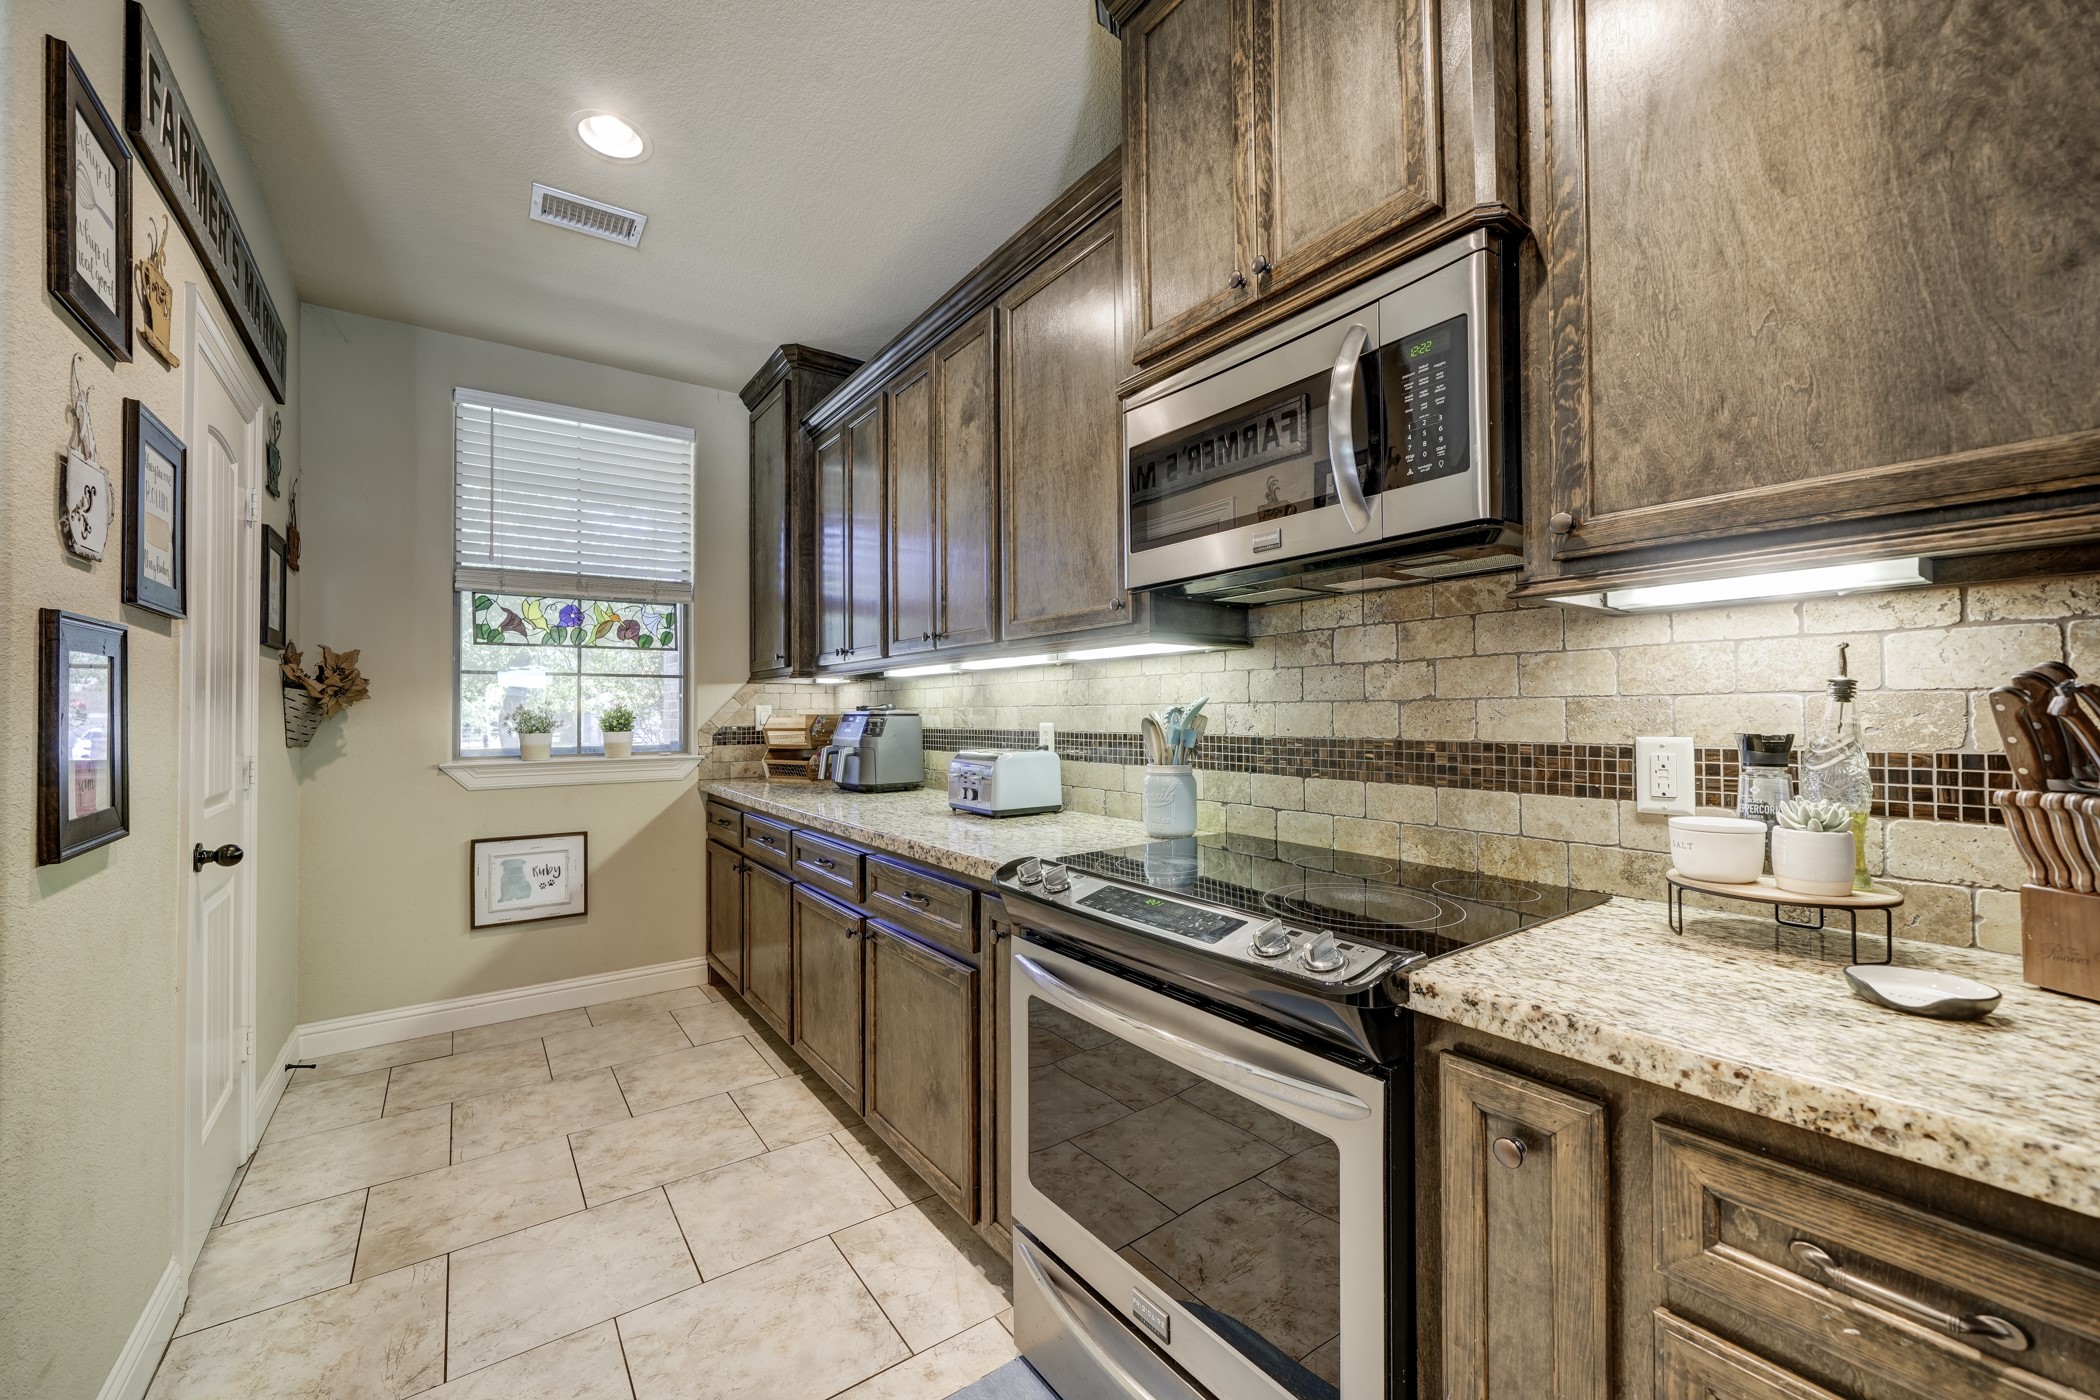 Stunning stone and tile work that make up the backsplash complement the cabinets and counter tops.